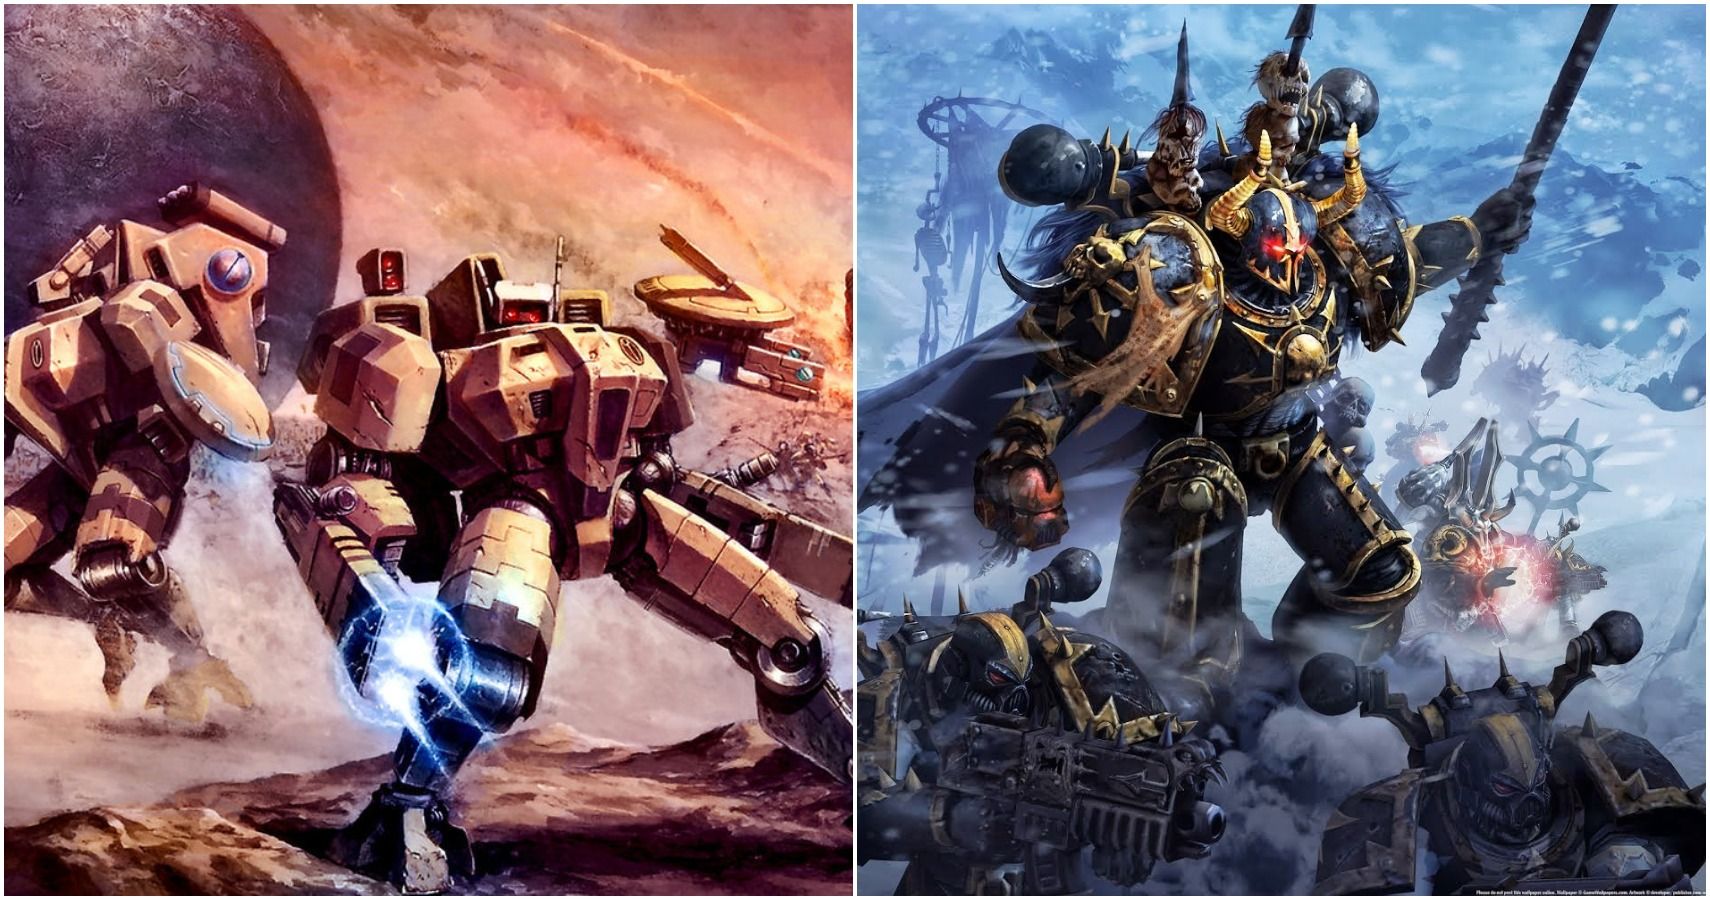 Top 10 Most Morally Bankrupt Factions in Warhammer 40,000